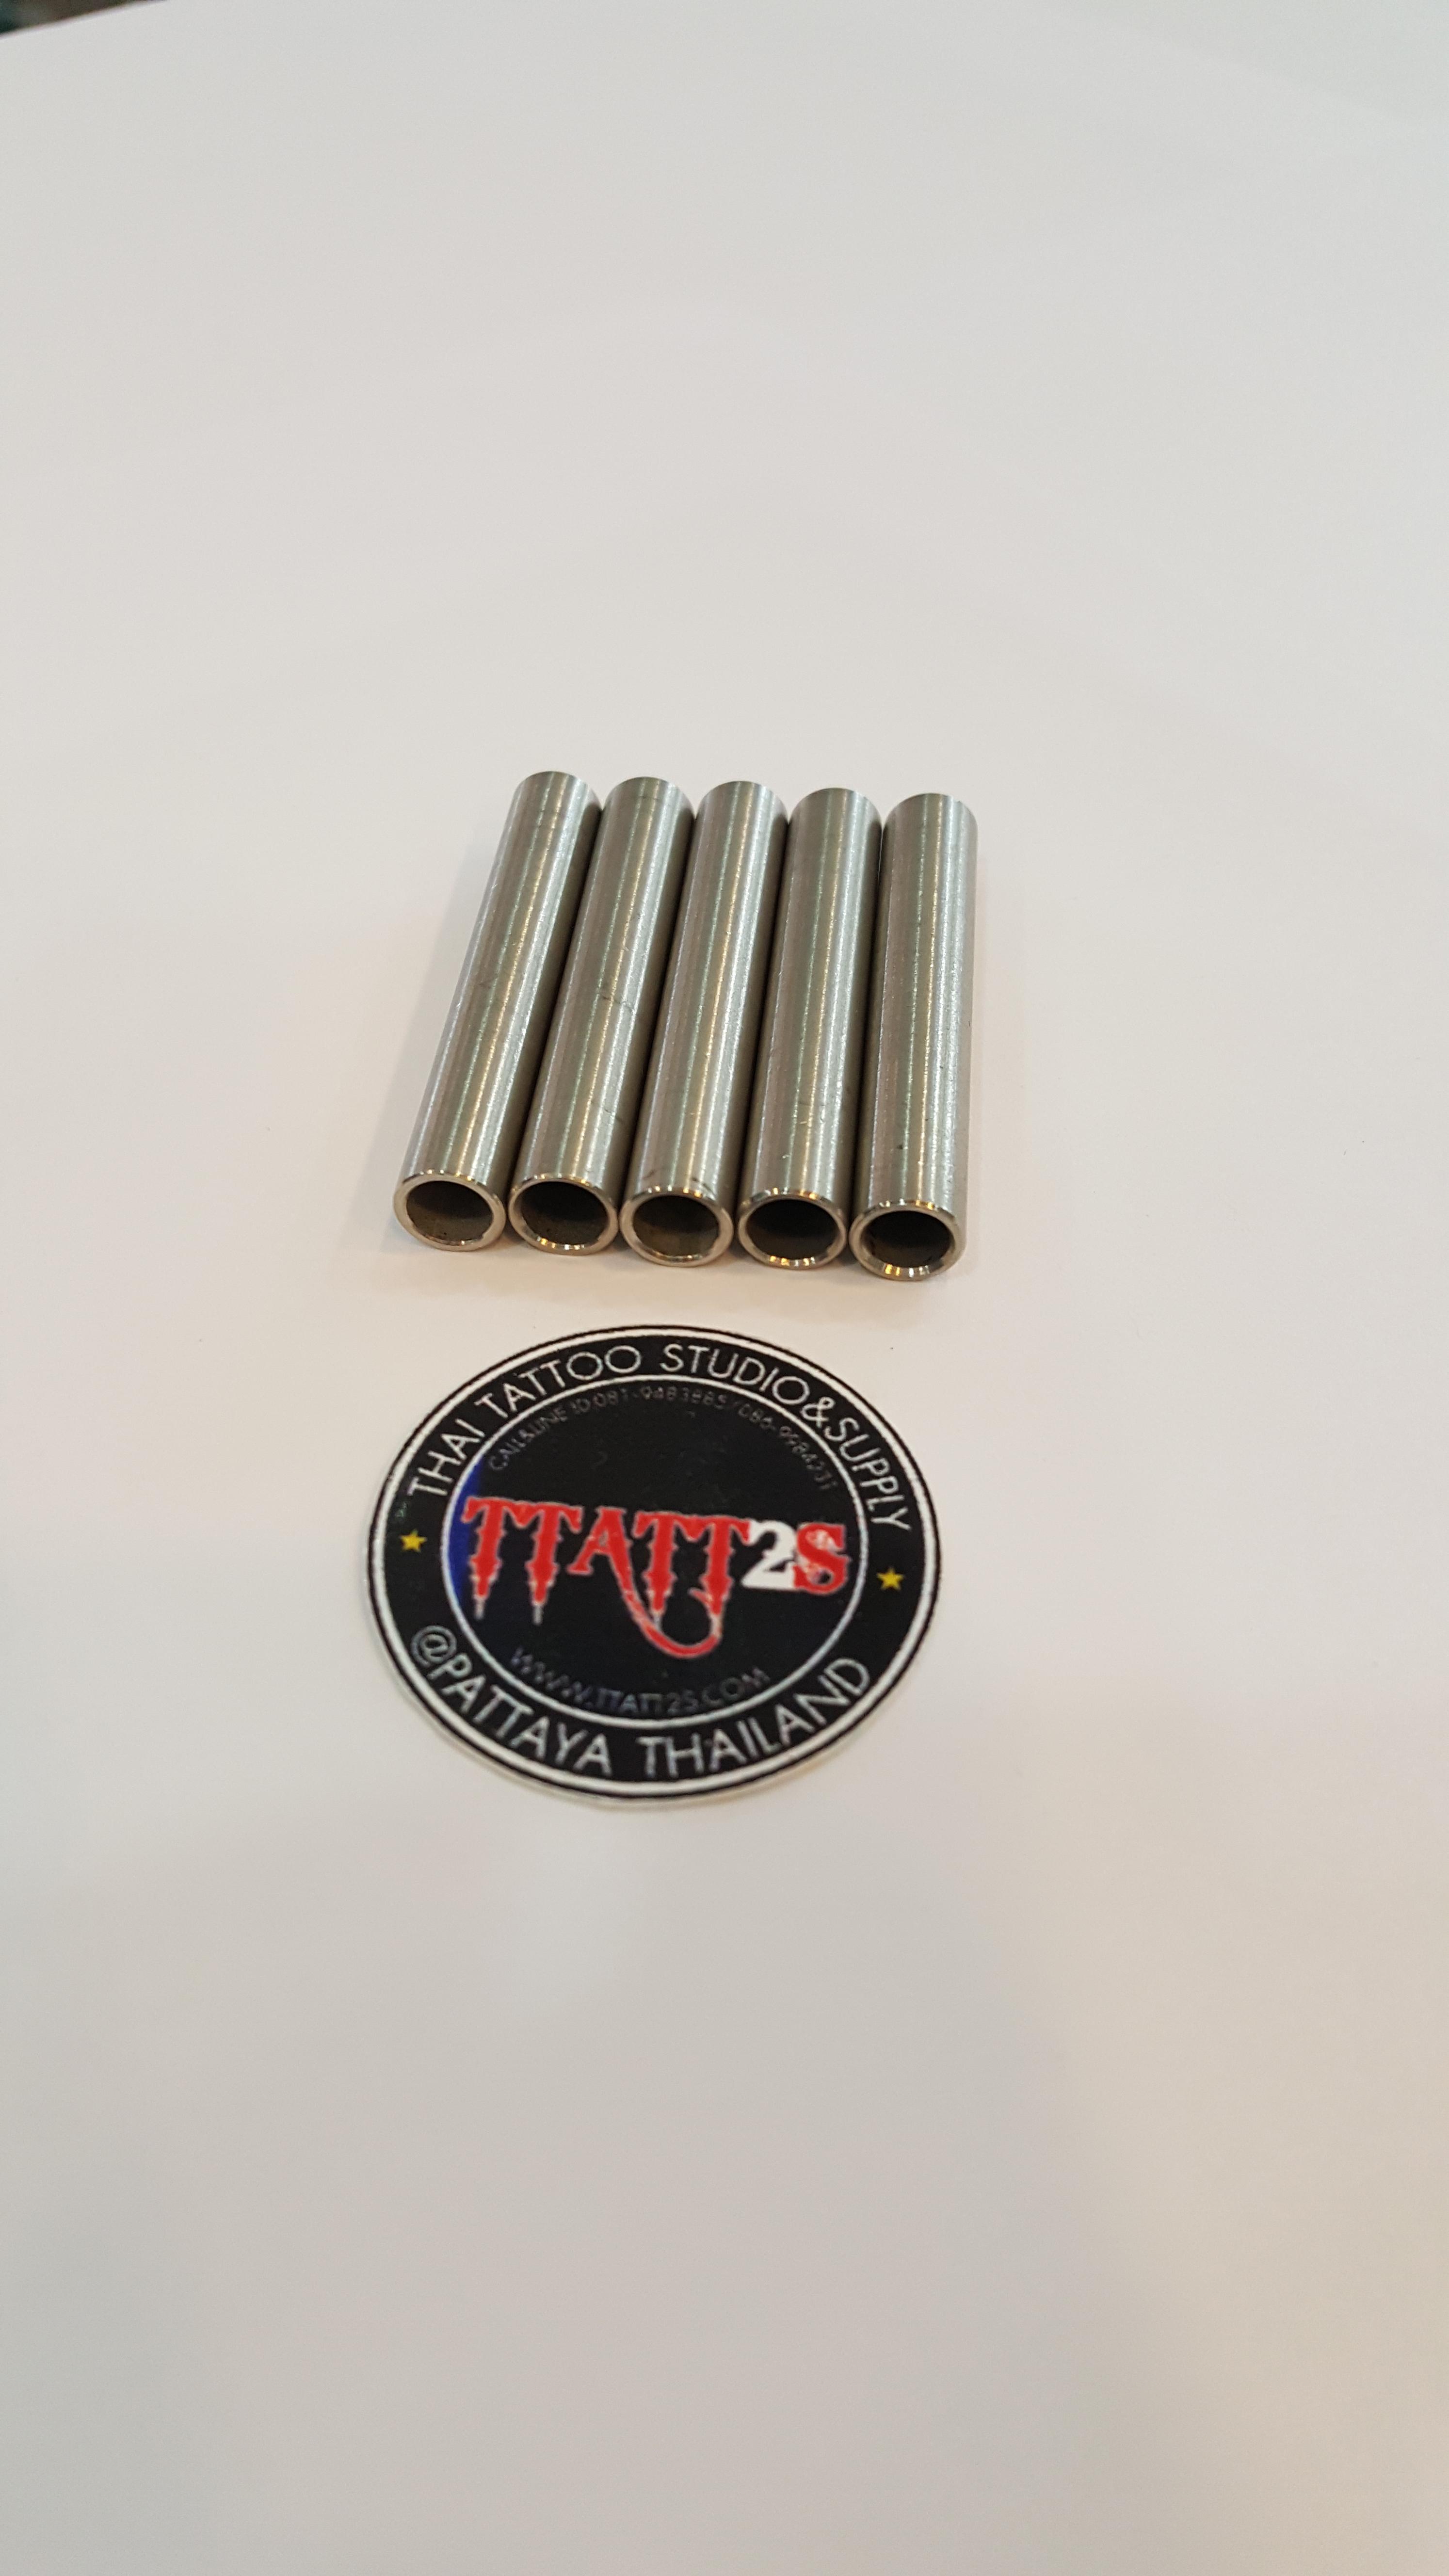 Stainless cylinder core 8 x 48 mm 